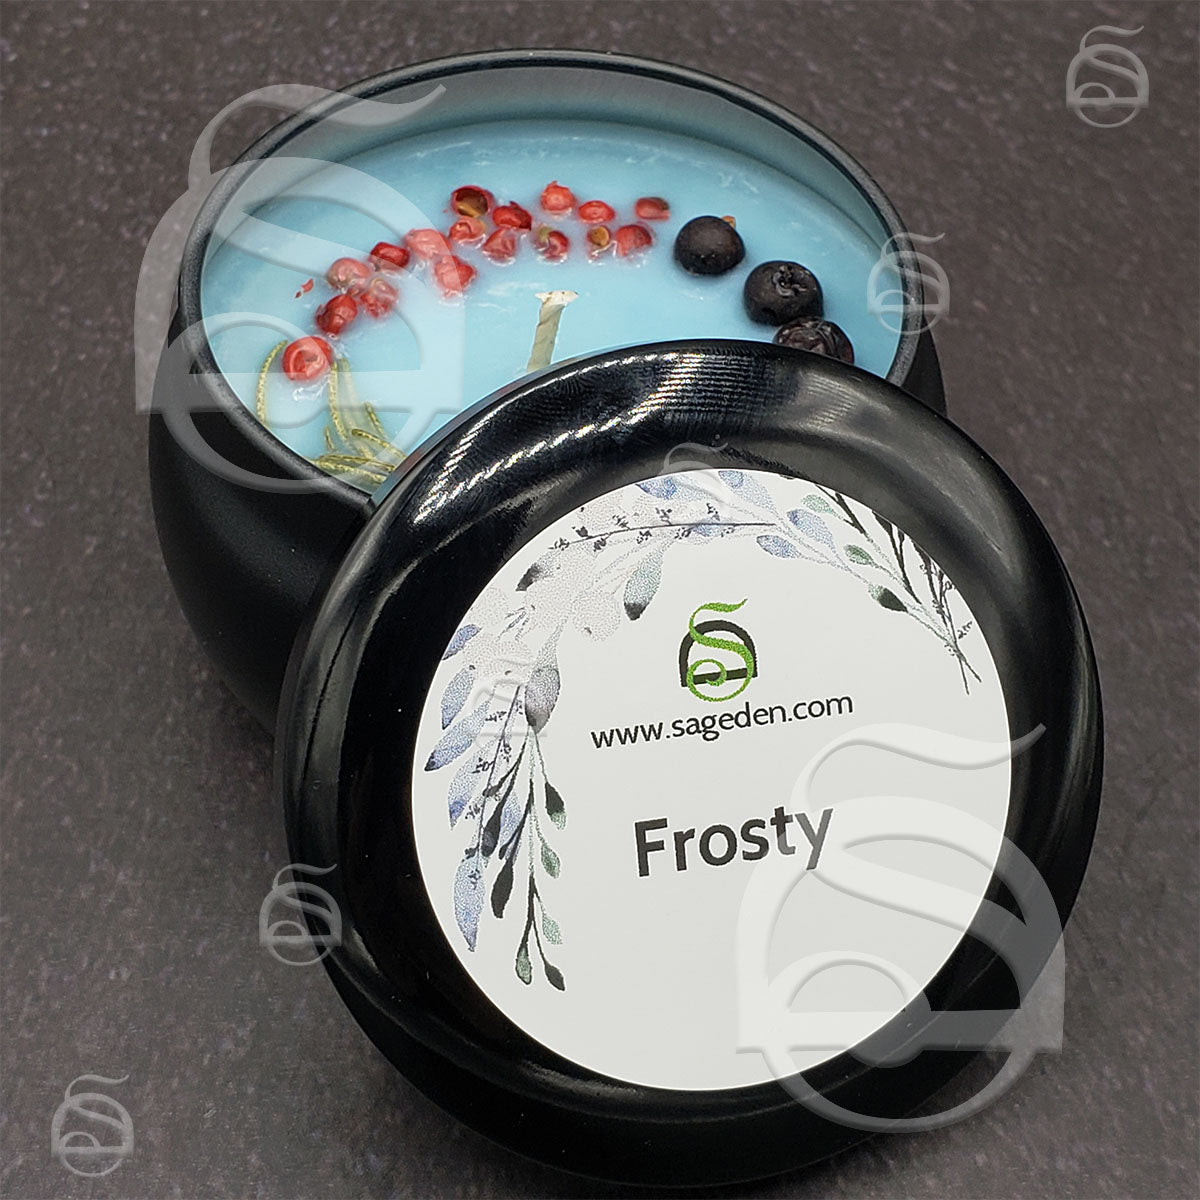 Frosty Candle & Wax Melt (Sage Den Product)